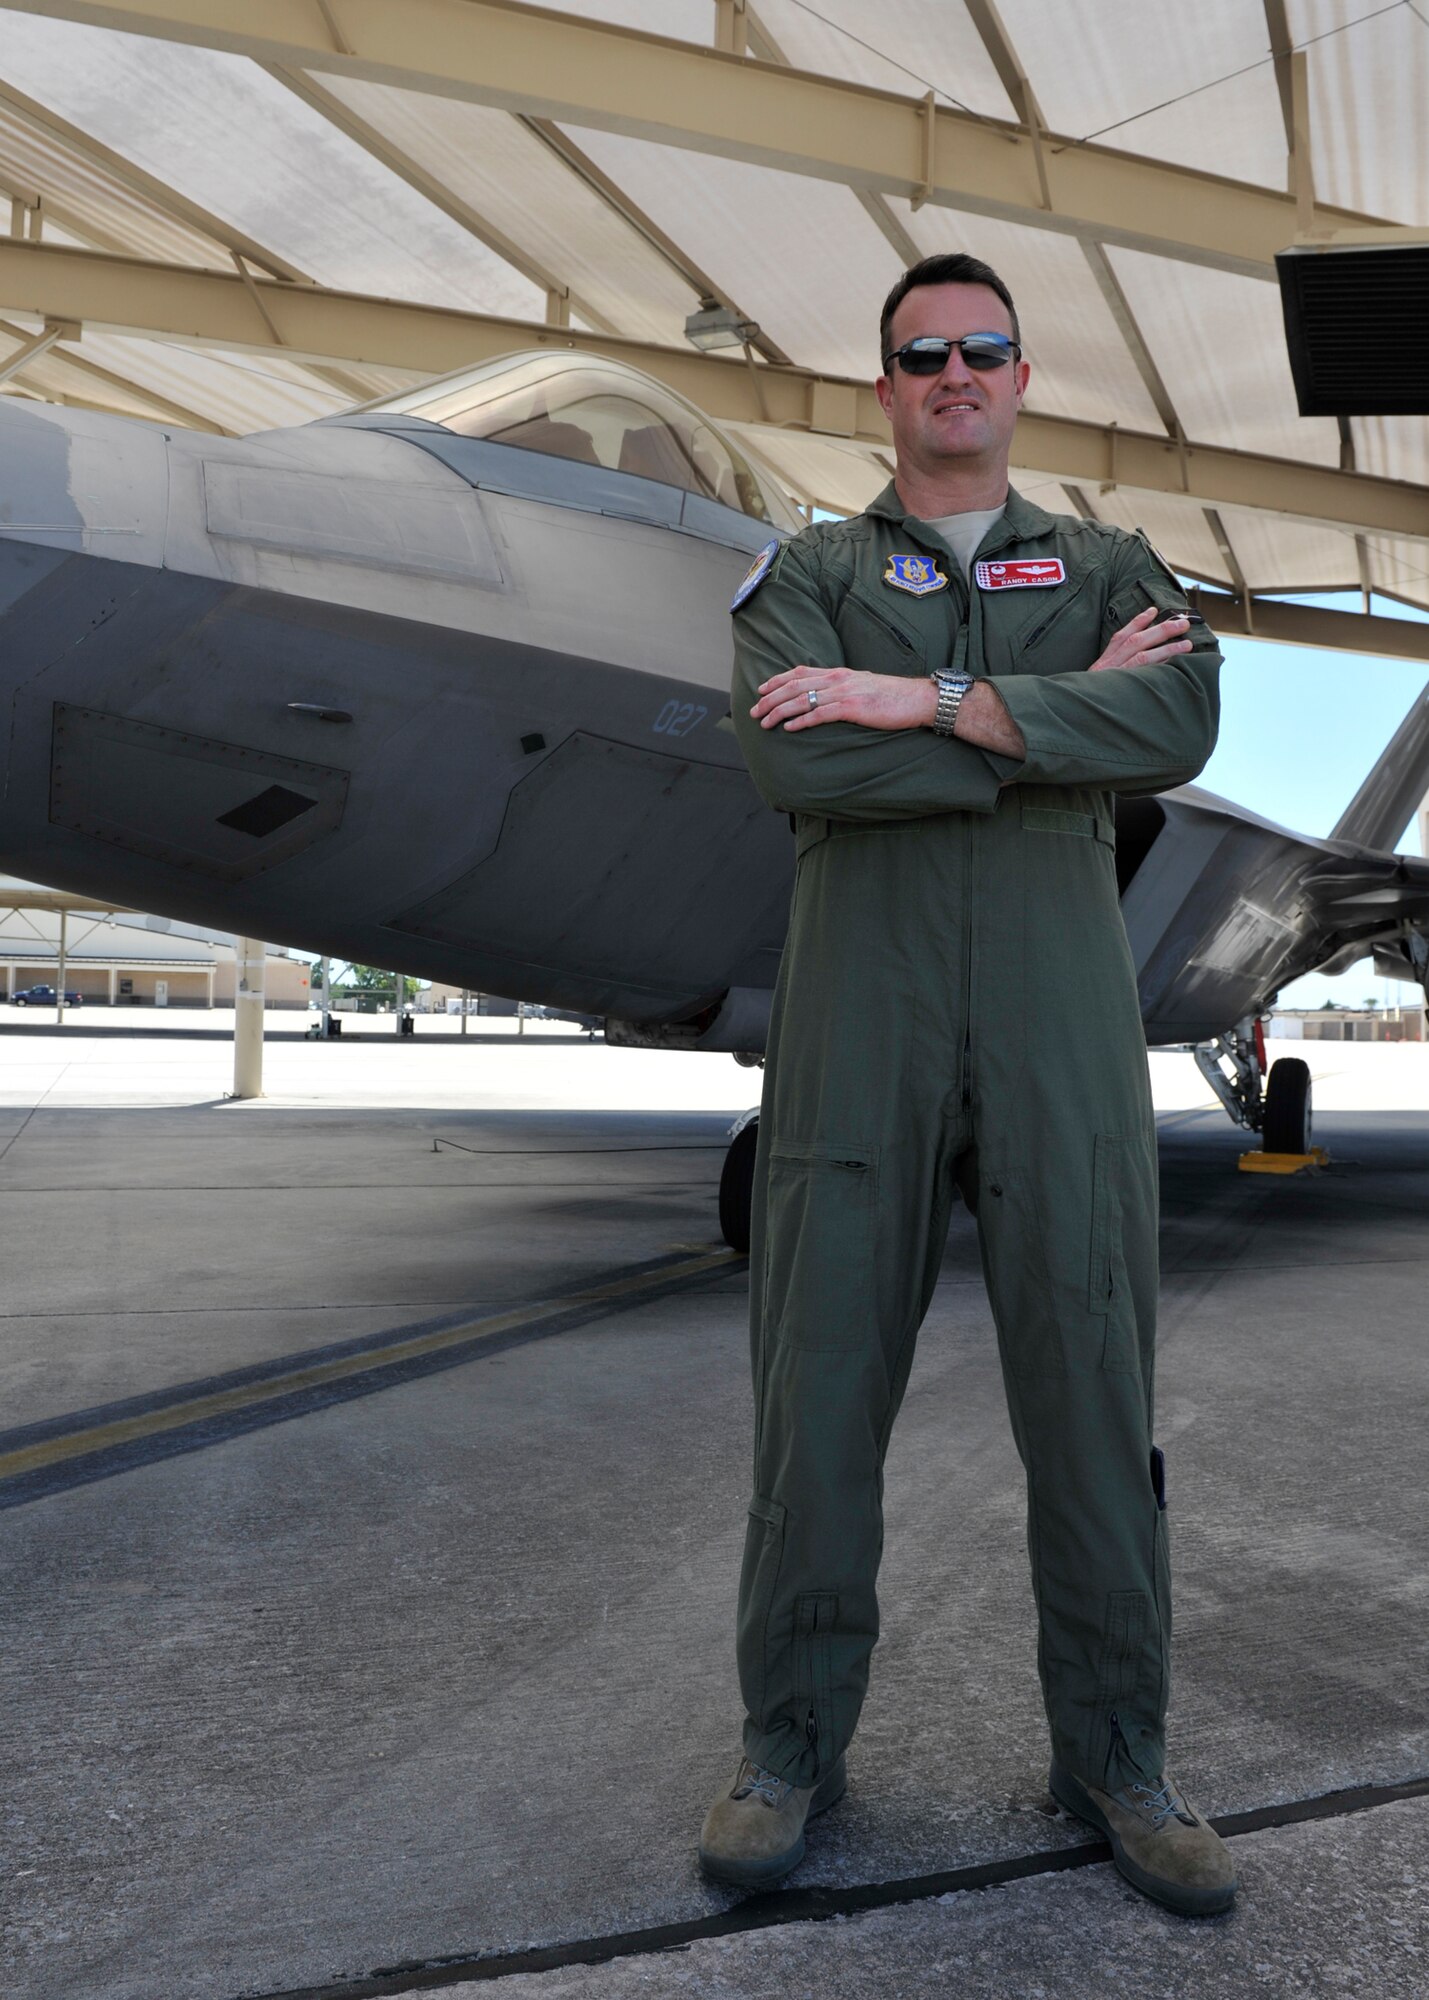 Lt. Col. Randall Cason, 301st Fighter Squadron commander, stands in front of an F-22 Raptor May 18 on the flightline at Tyndall Air Force Base, Fla. In 2006, Cason became the first Air Force Reserve pilot to fly the F-22. (U.S. Air Force photo by Airman 1st Class Sergio A. Gamboa)